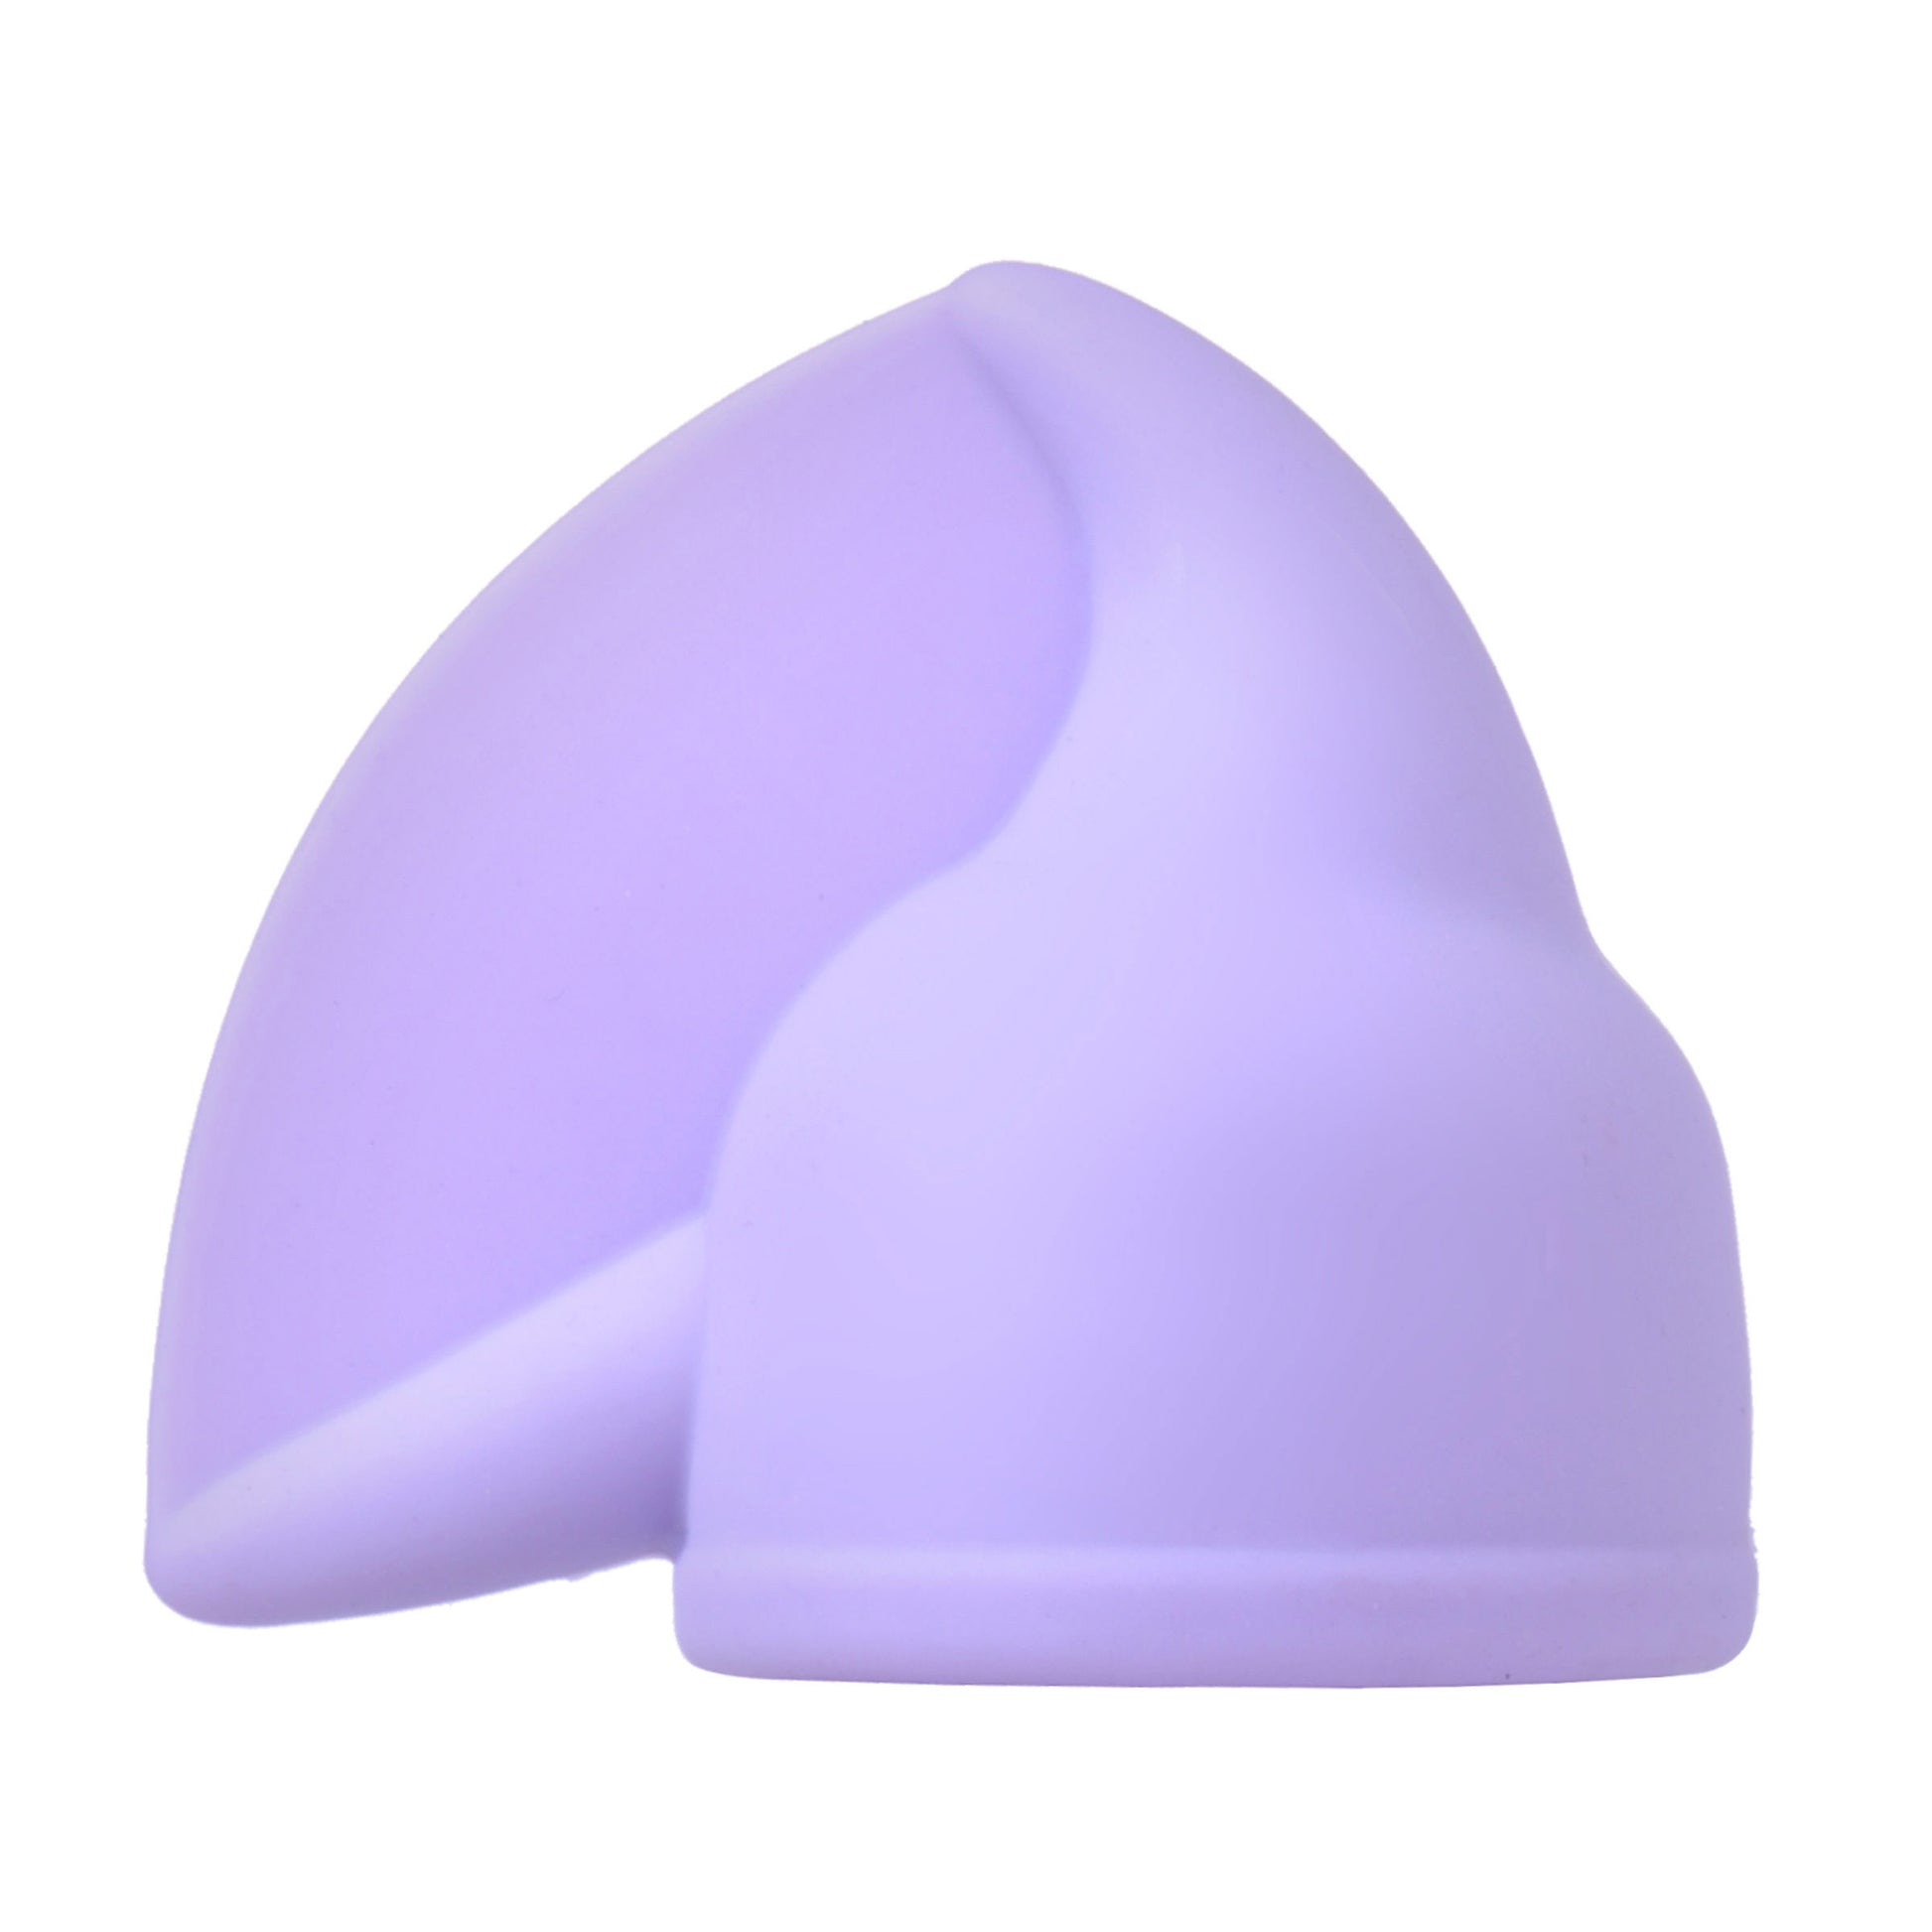 Flutter Tip Silicone Wand Attachment - Boxed - UABDSM